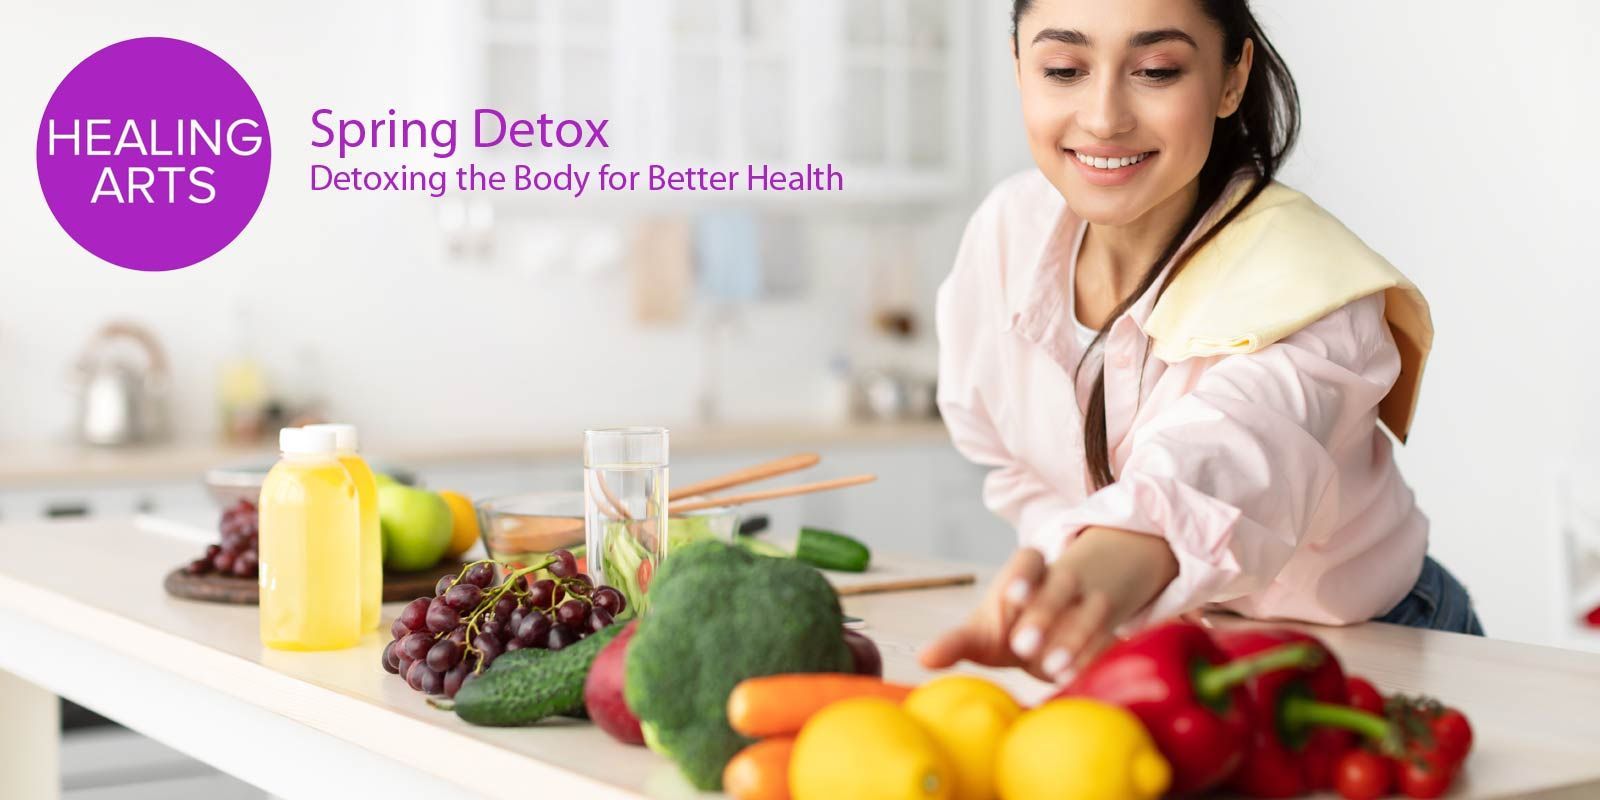 Spring Detox - Detoxing the Body for Better Health. The liver is the primary detox organ.